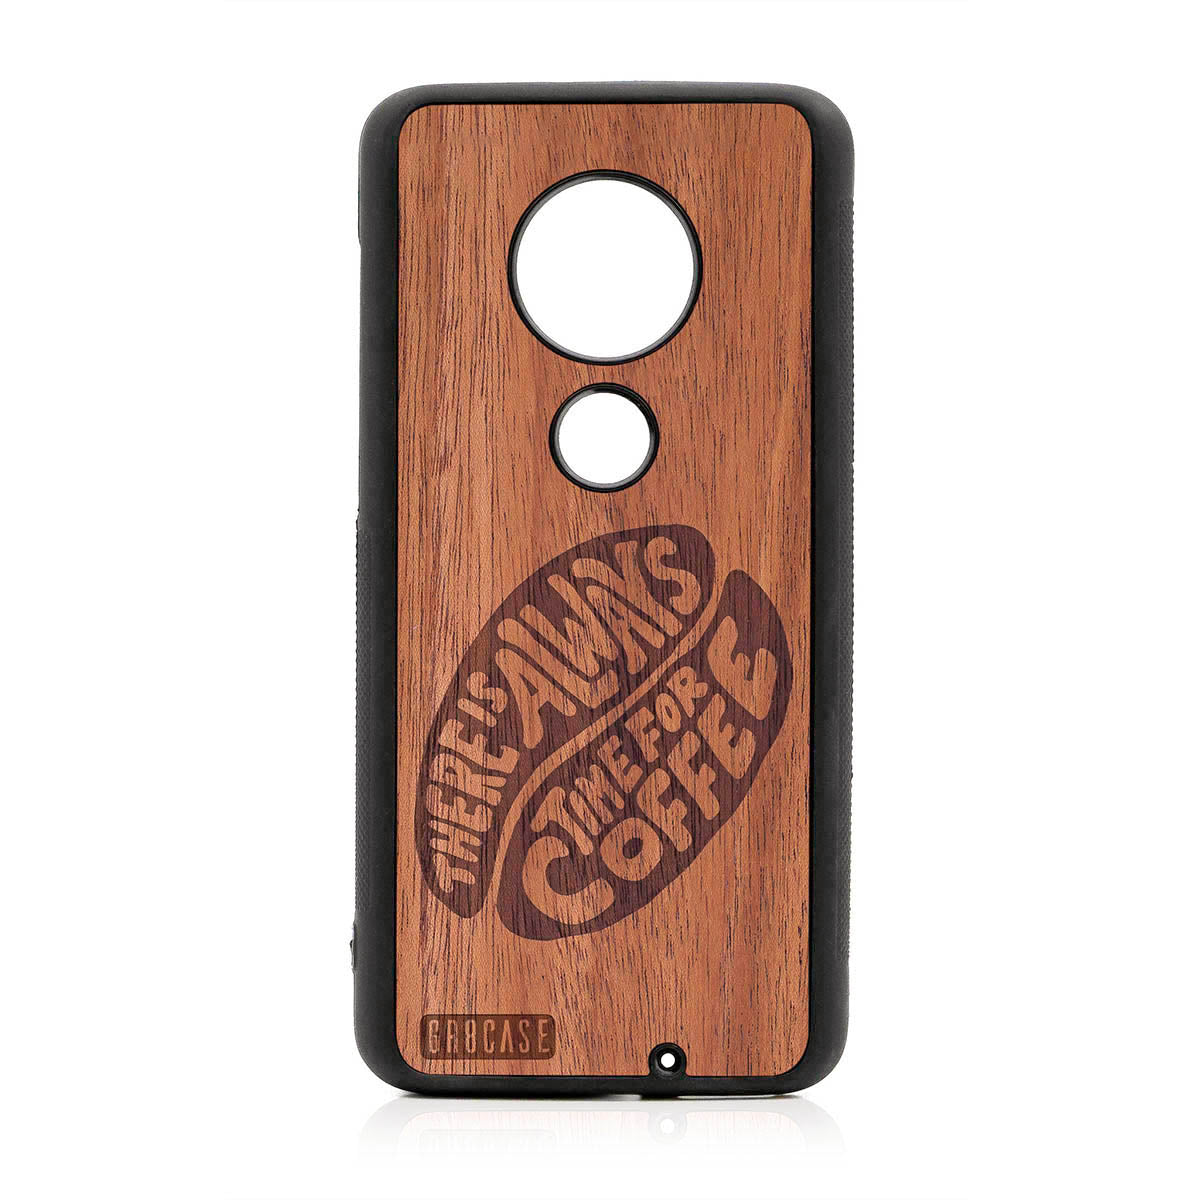 There Is Always Time For Coffee Design Wood Case For Moto G7 Plus